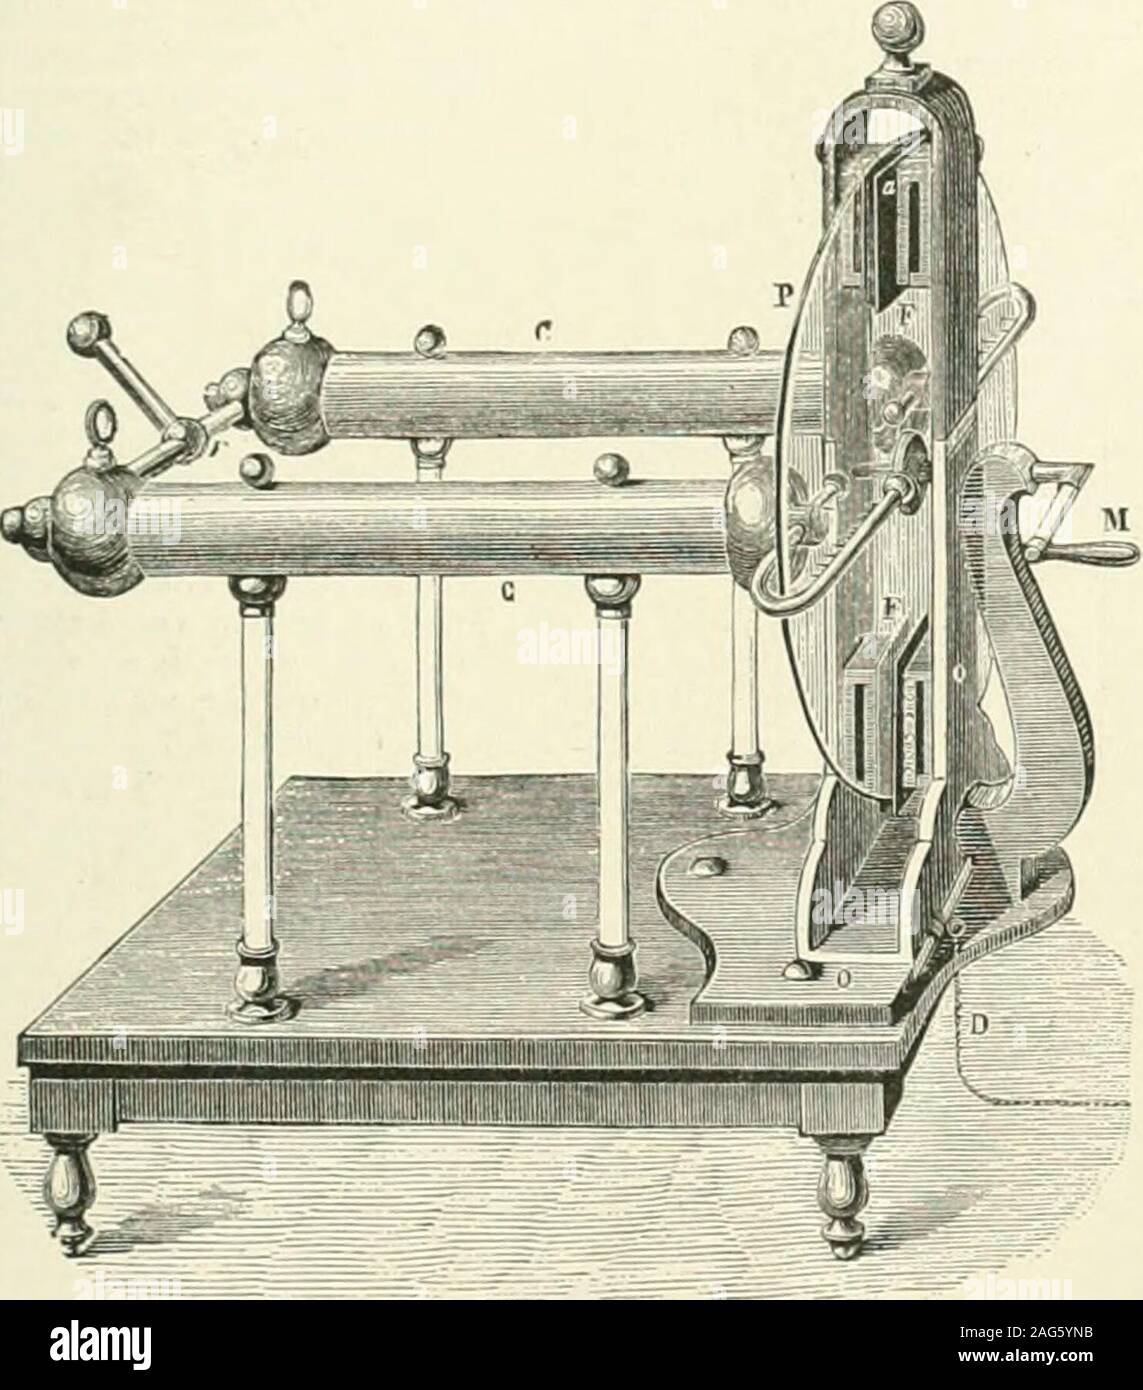 . The American encyclopædia of commerce, manufactures, commercial law, and finance. y a smaller rod, r. The action of themachine is founded on the excitation of electric- ELECTRICAL MACHINE 315 ELECTHICITY ity by friction, and on tlie action of induction.By friction with the rubbers, the glass becomespositively, and the rubbers negatively electrified ;but the rubbers communicate with the groun&lt;l bymeans of a chain, and, consequently, as fast asthe negative electricity is generated, its tension isreduced to zero by contact witii the ground. Theposiiiveelectricityof the gla^sads then by induc Stock Photo